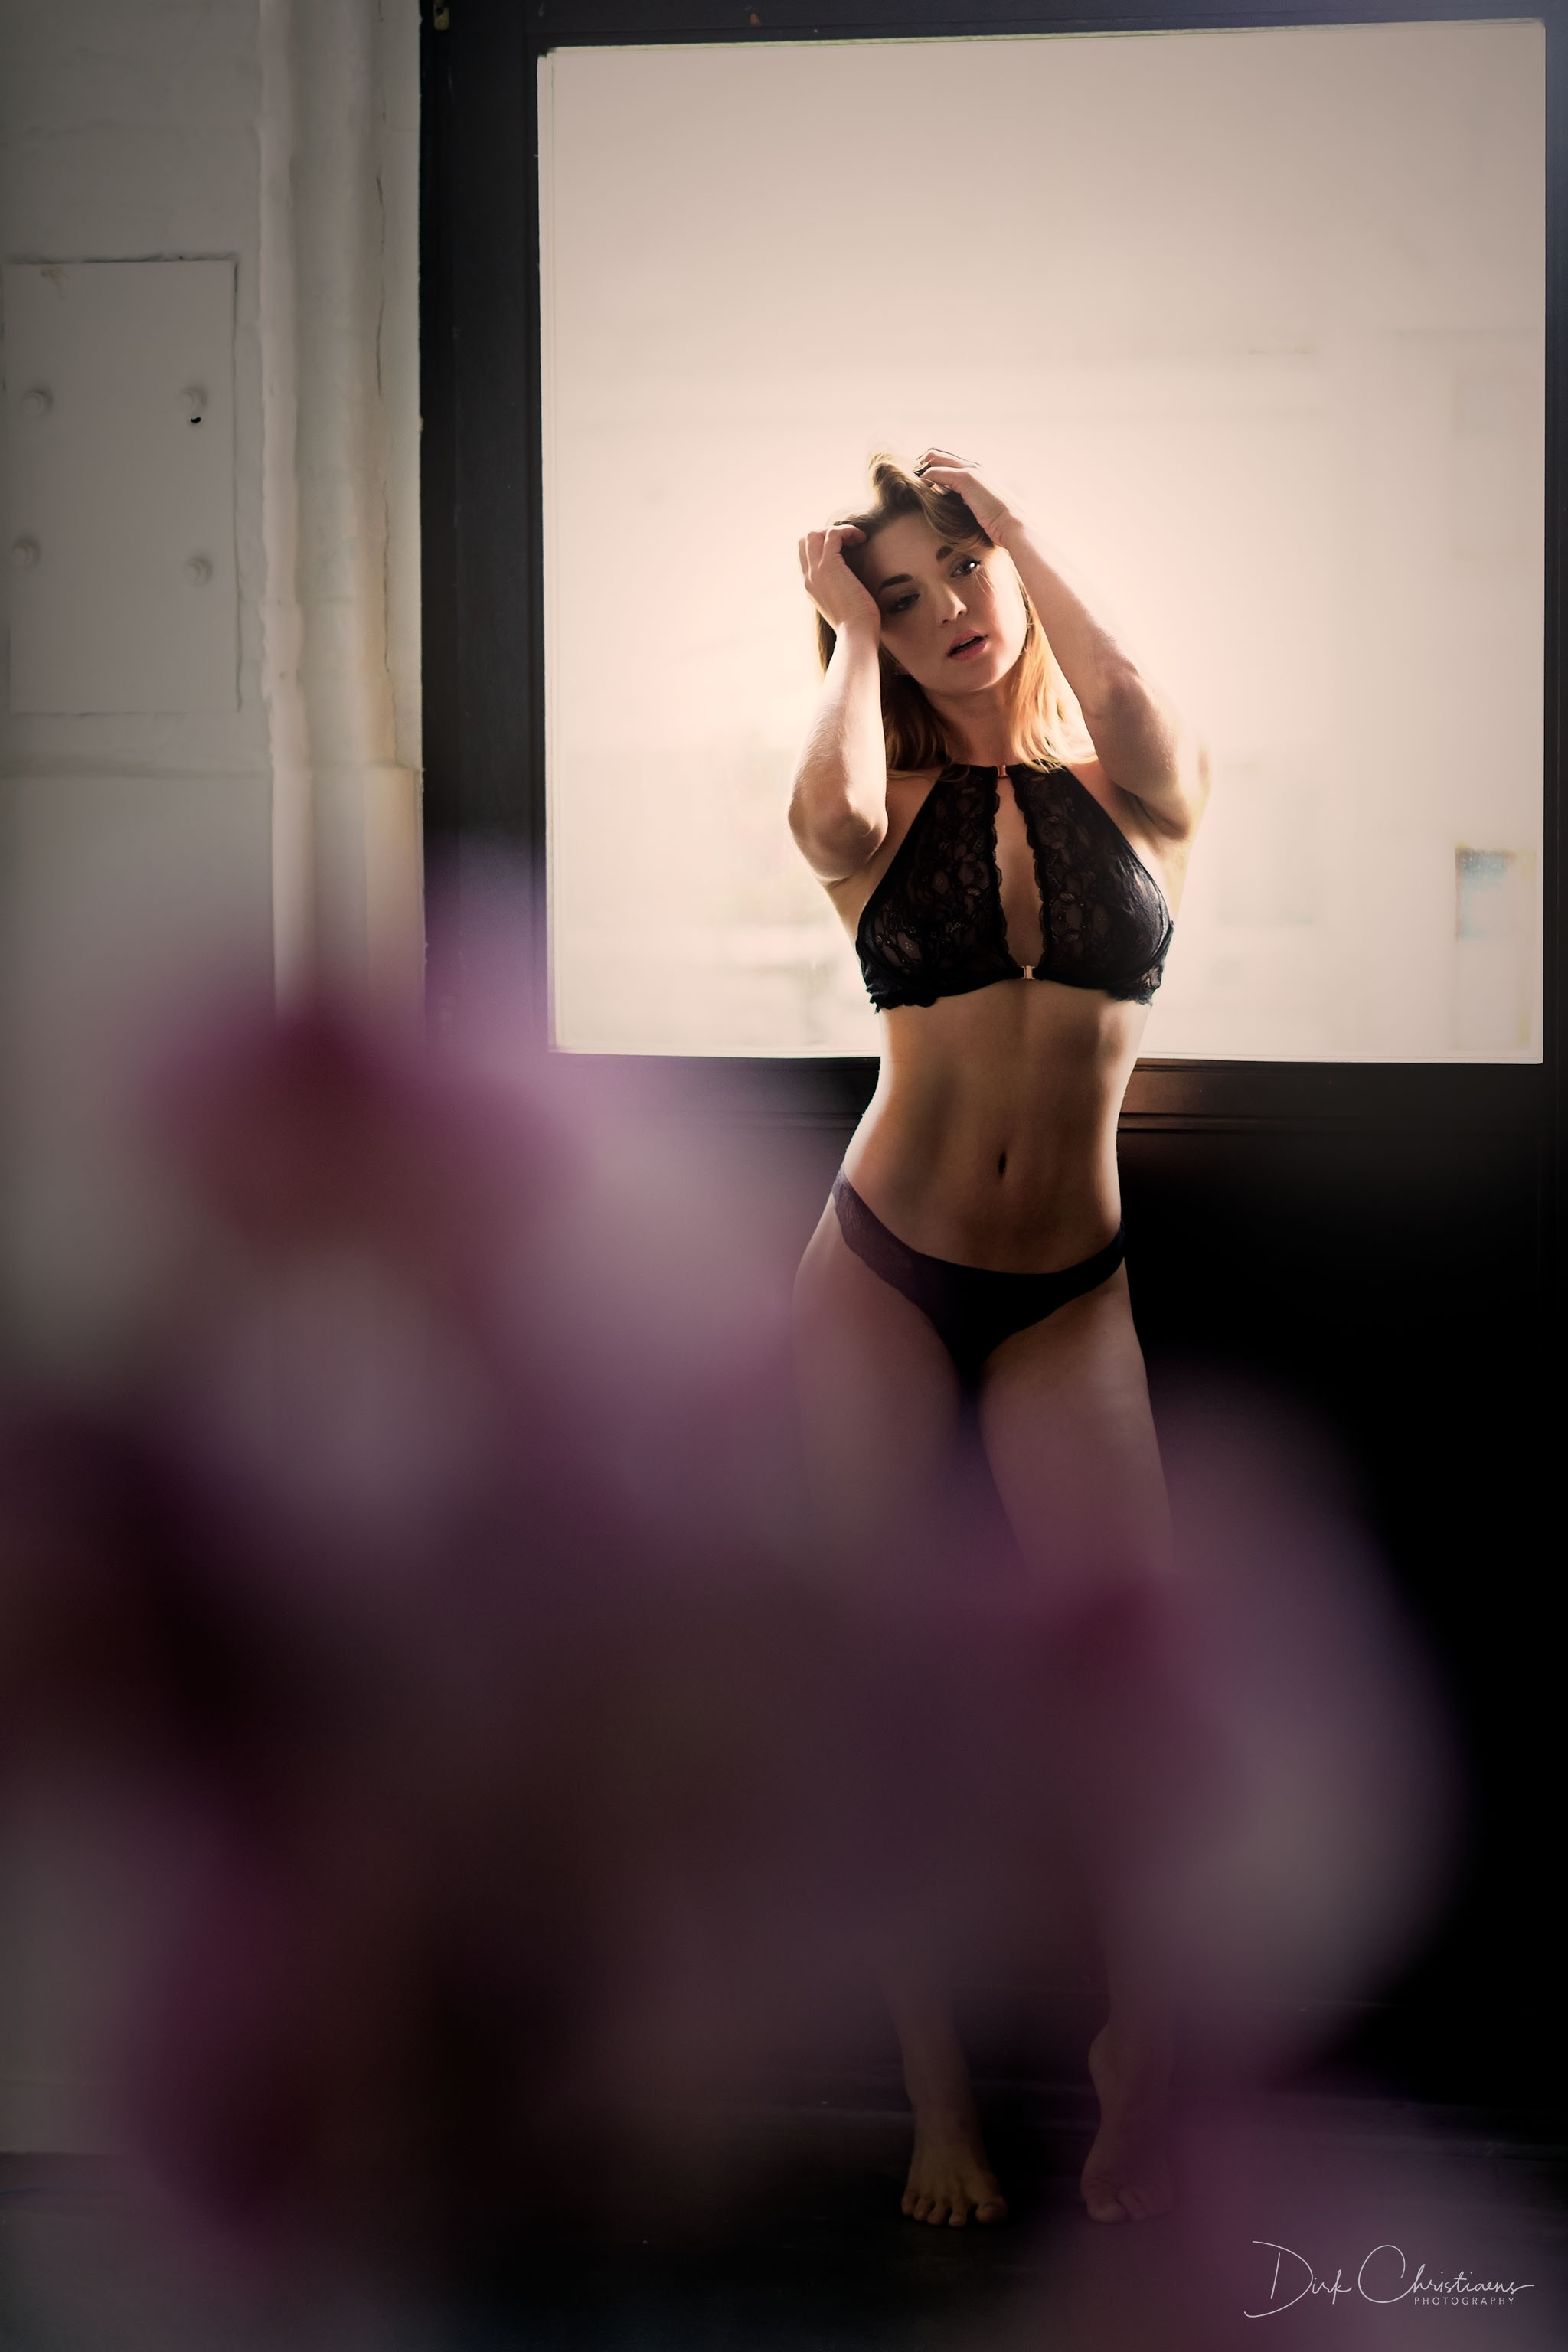 Michelle NMW, model from Australia at a boudoir photoshoot